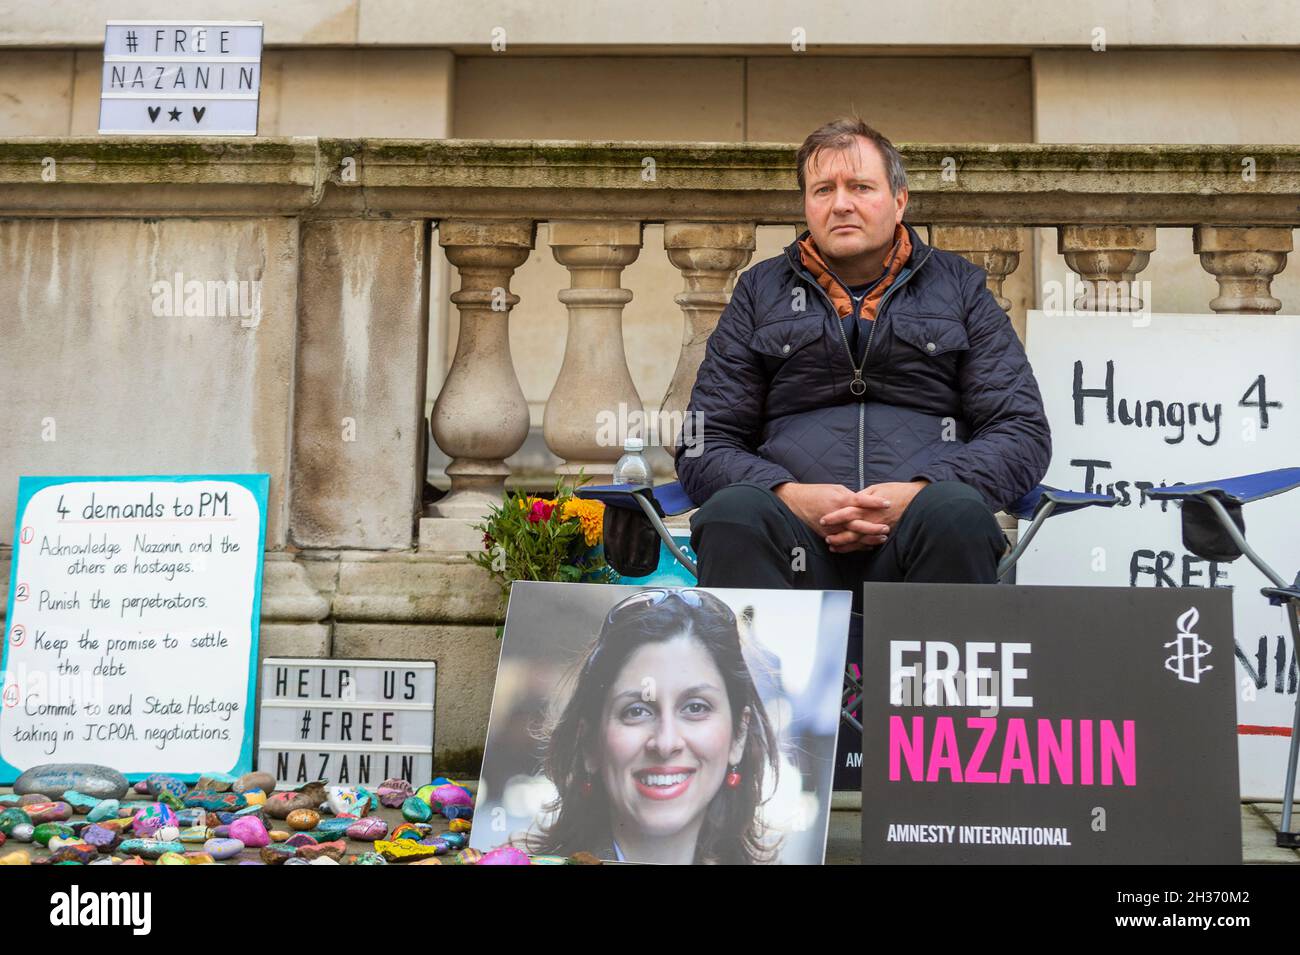 London, UK.  26 October 2021.  Richard Ratcliffe, husband of detained British-Iranian aid worker Nazanin Zaghari-Ratcliffe, on day 3 of his hunger strike outside the Foreign and Commonwealth Office demanding that the UK government tries to do more to secure her release.  Mrs Zaghari-Ratcliffe has been held in Iran since 2016 and has not seen her daughter for two years and faces a return to prison.  Credit: Stephen Chung / Alamy Live News Stock Photo